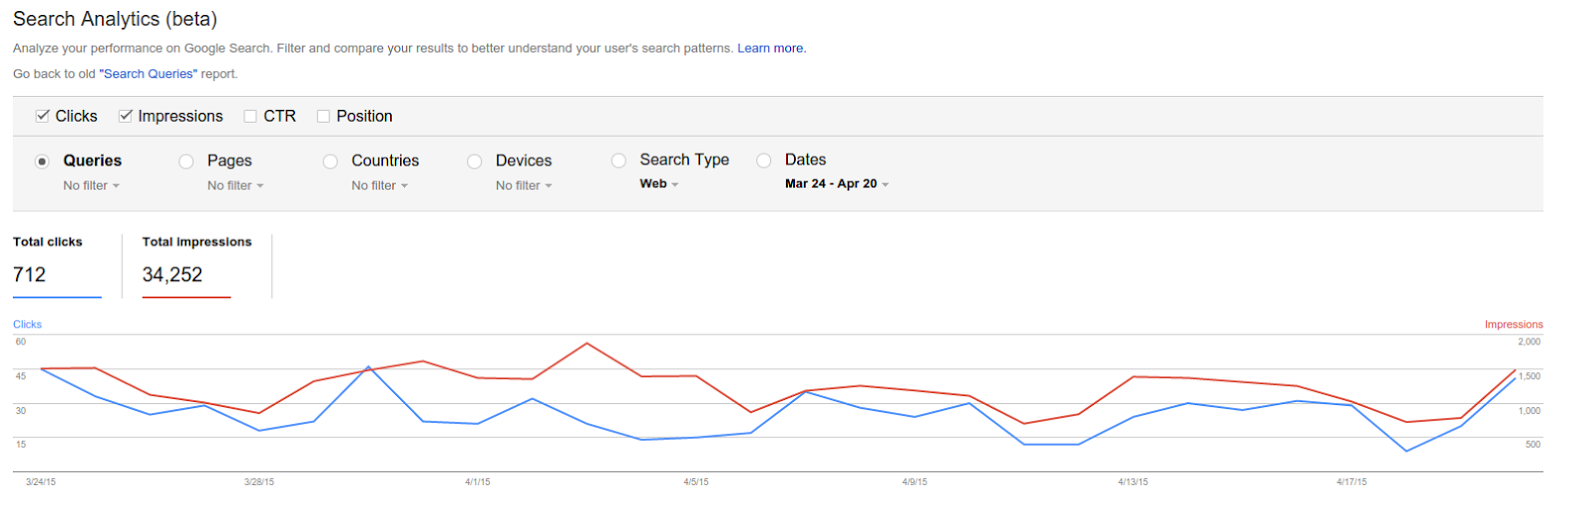 More Users Added to Search Analytics Beta in Google Webmaster Tools